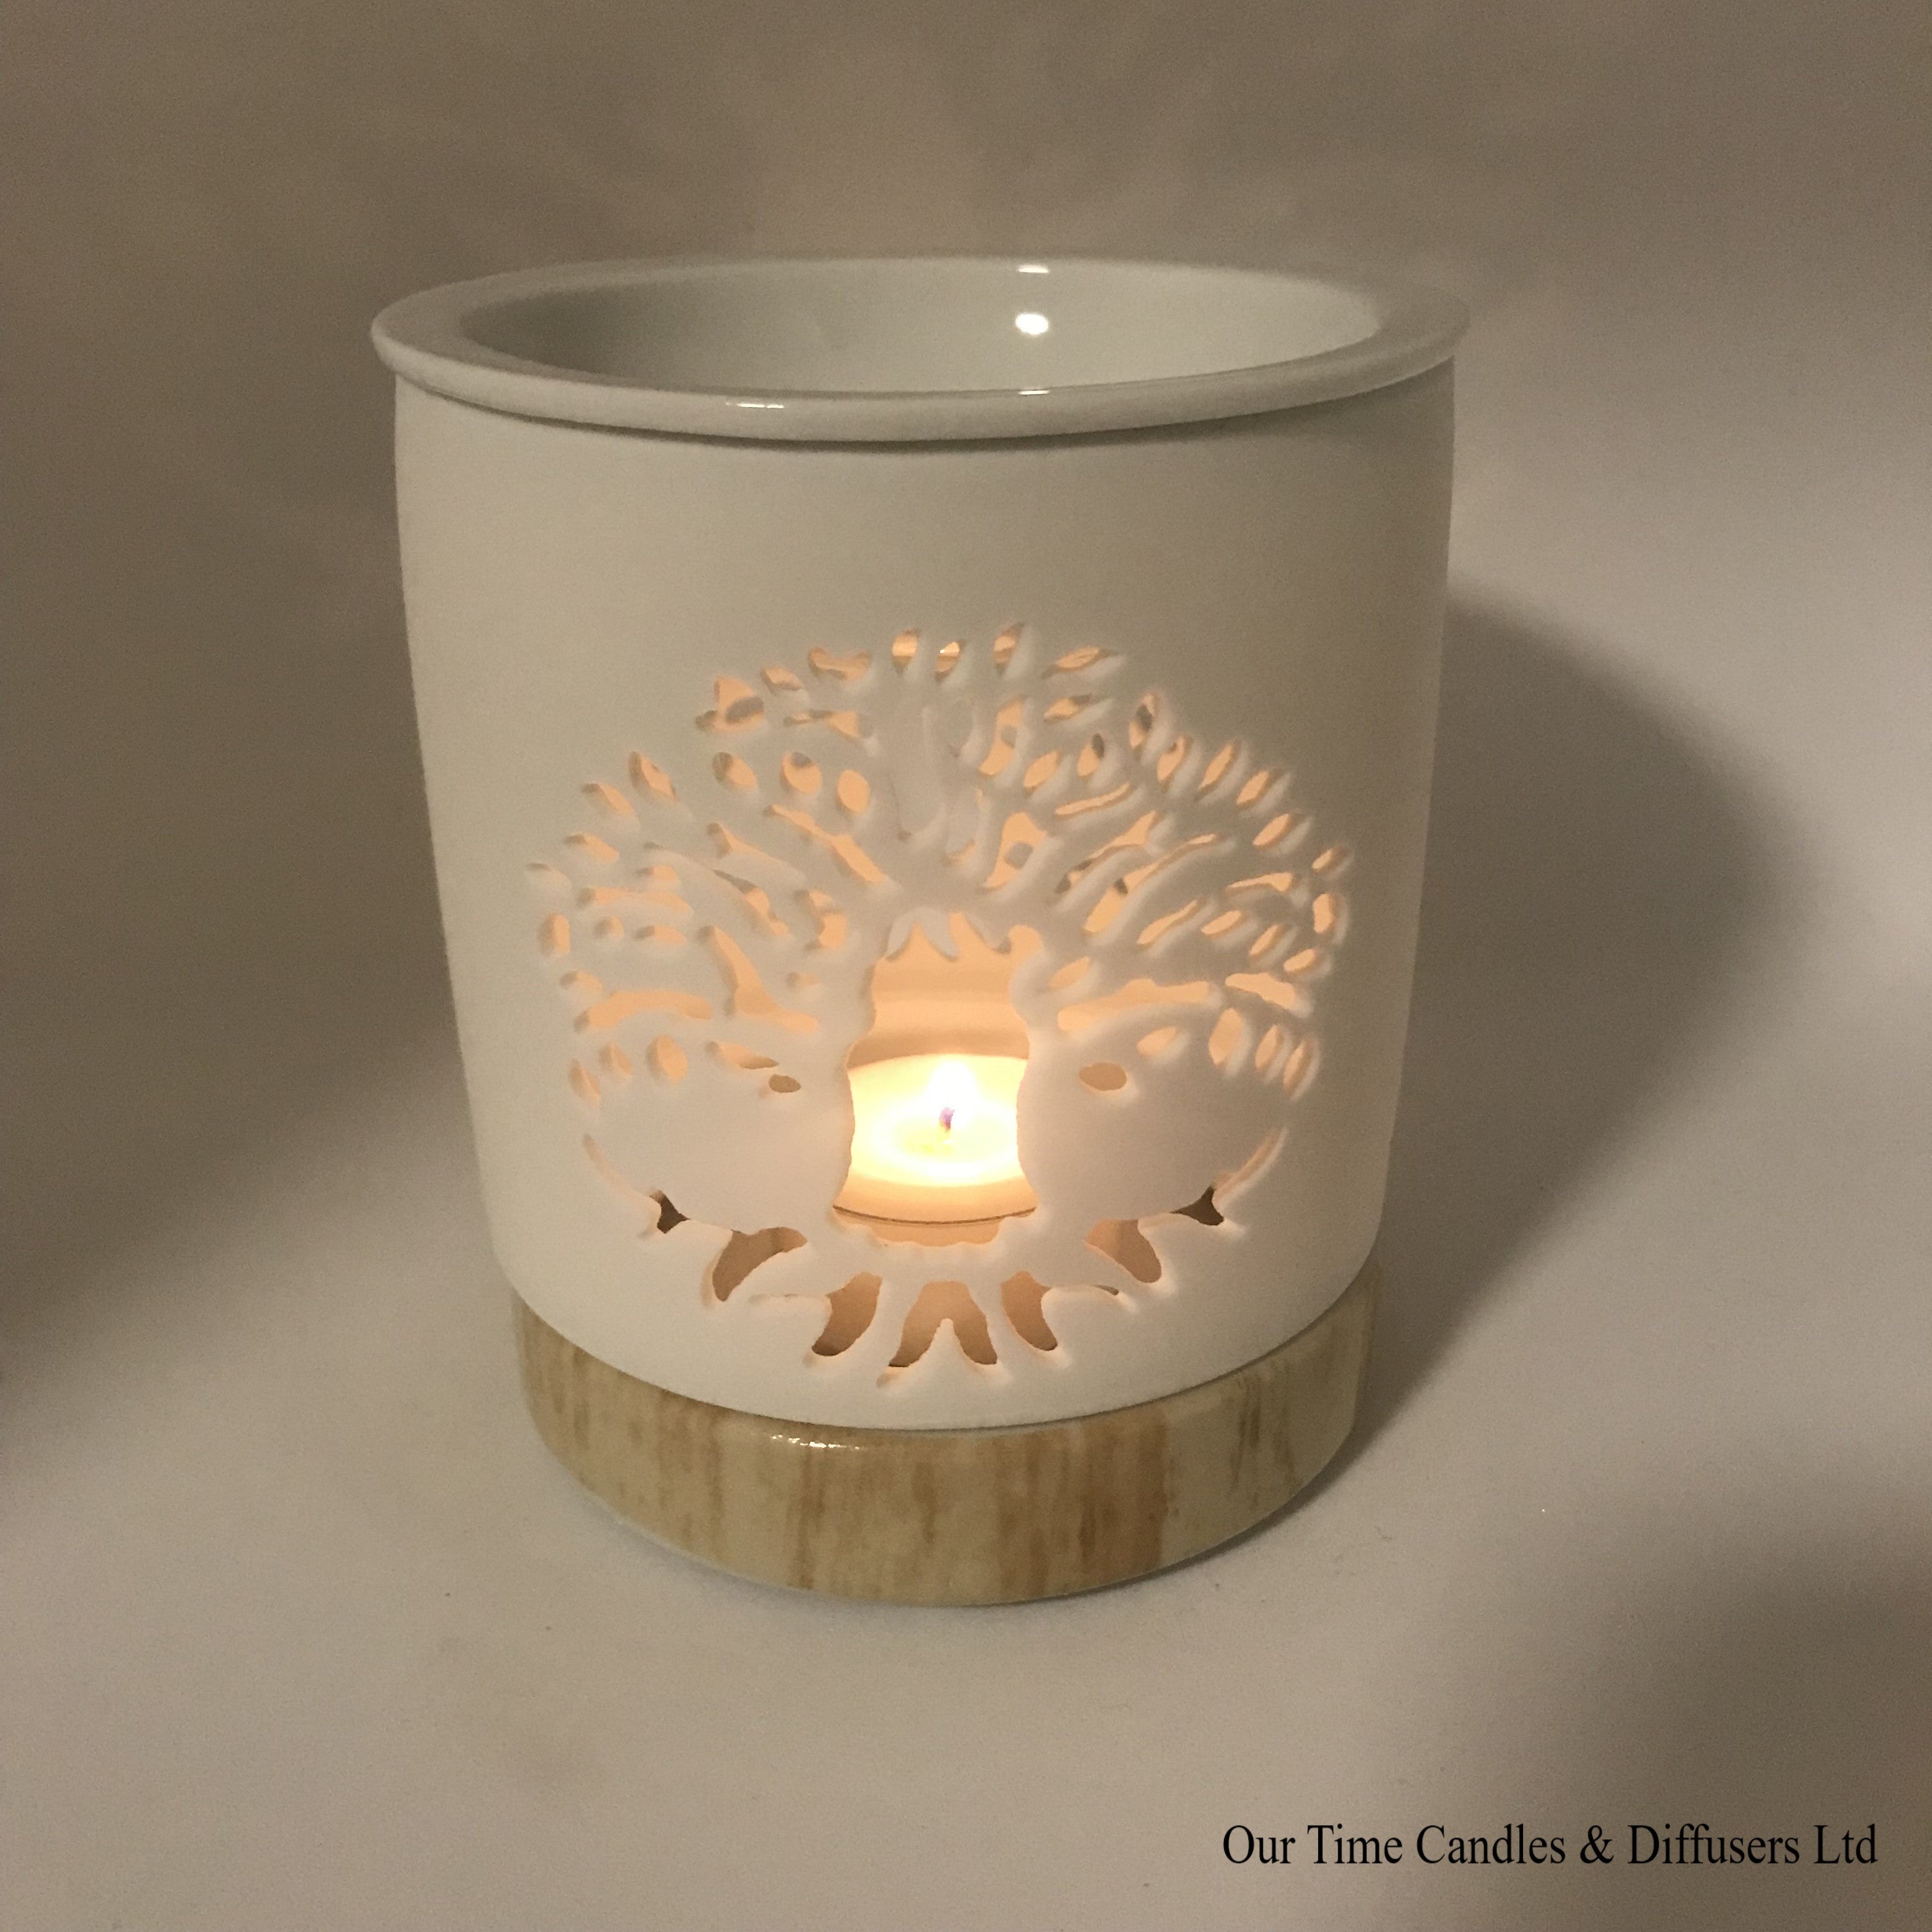 Wax Melt Warmers from Our Time Candles & Diffusers.